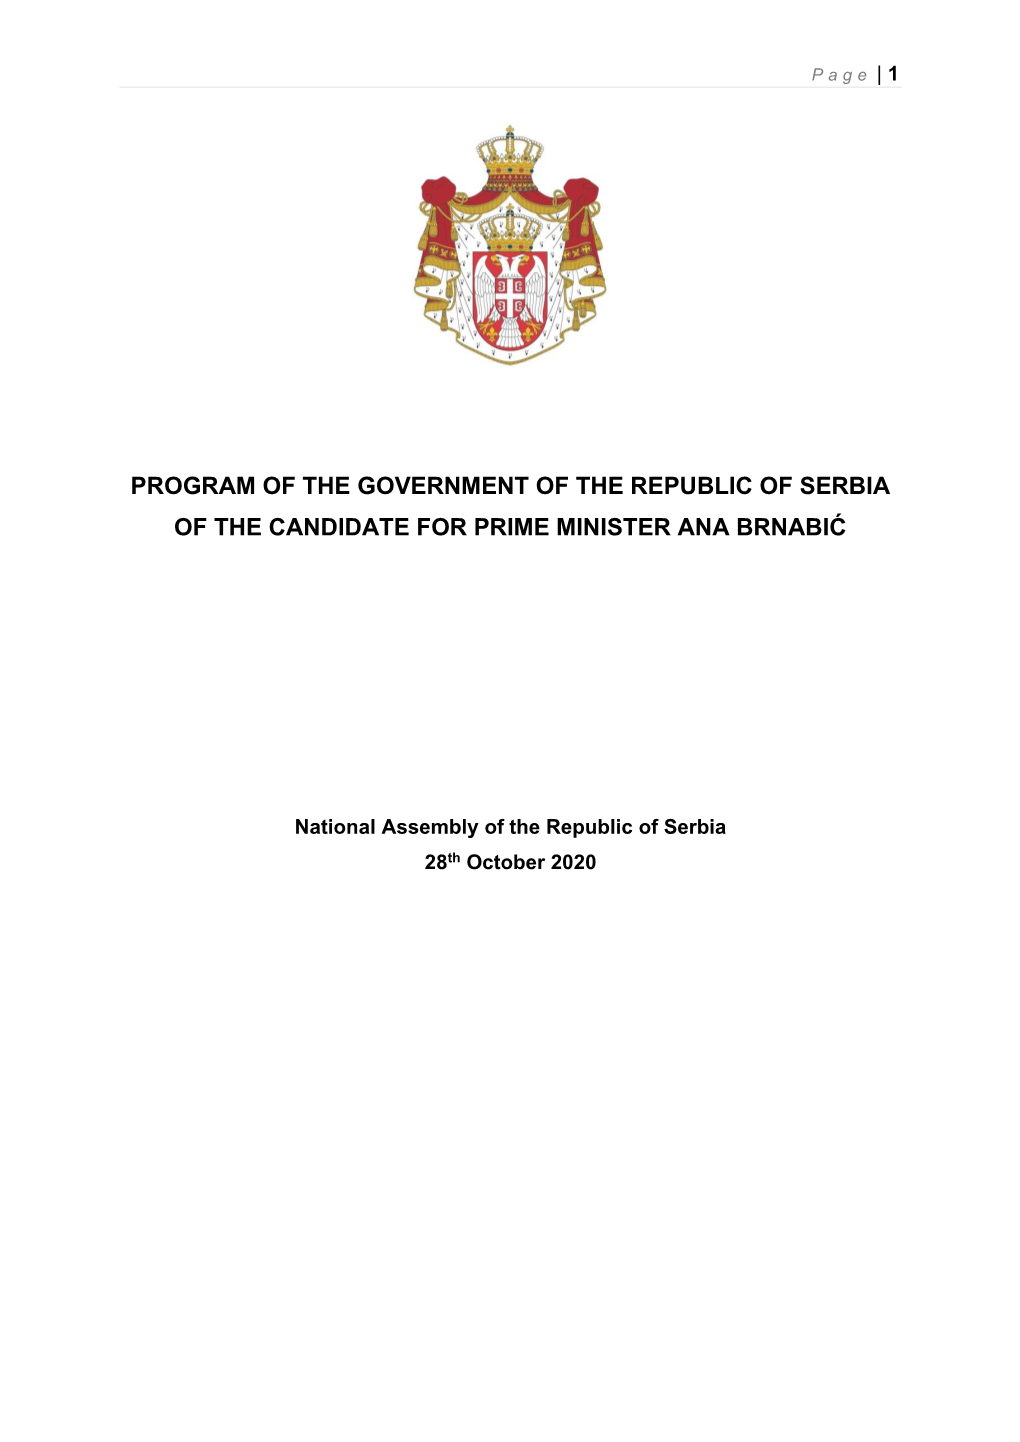 Program of the Government of the Republic of Serbia of the Candidate for Prime Minister Ana Brnabić